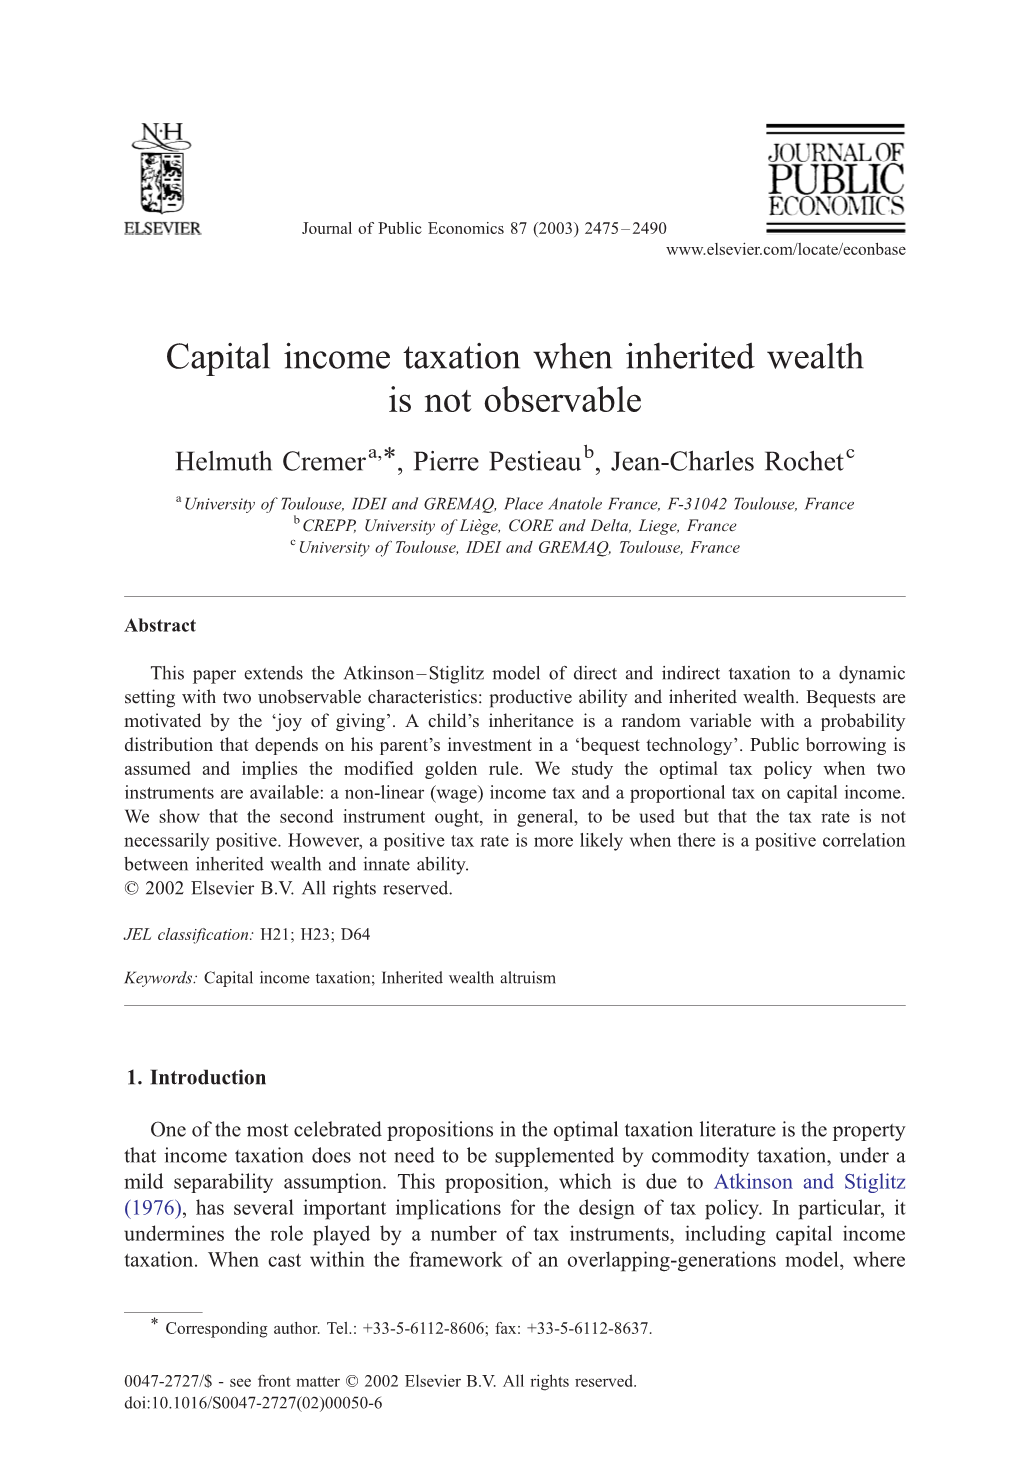 Capital Income Taxation When Inherited Wealth Is Not Observable